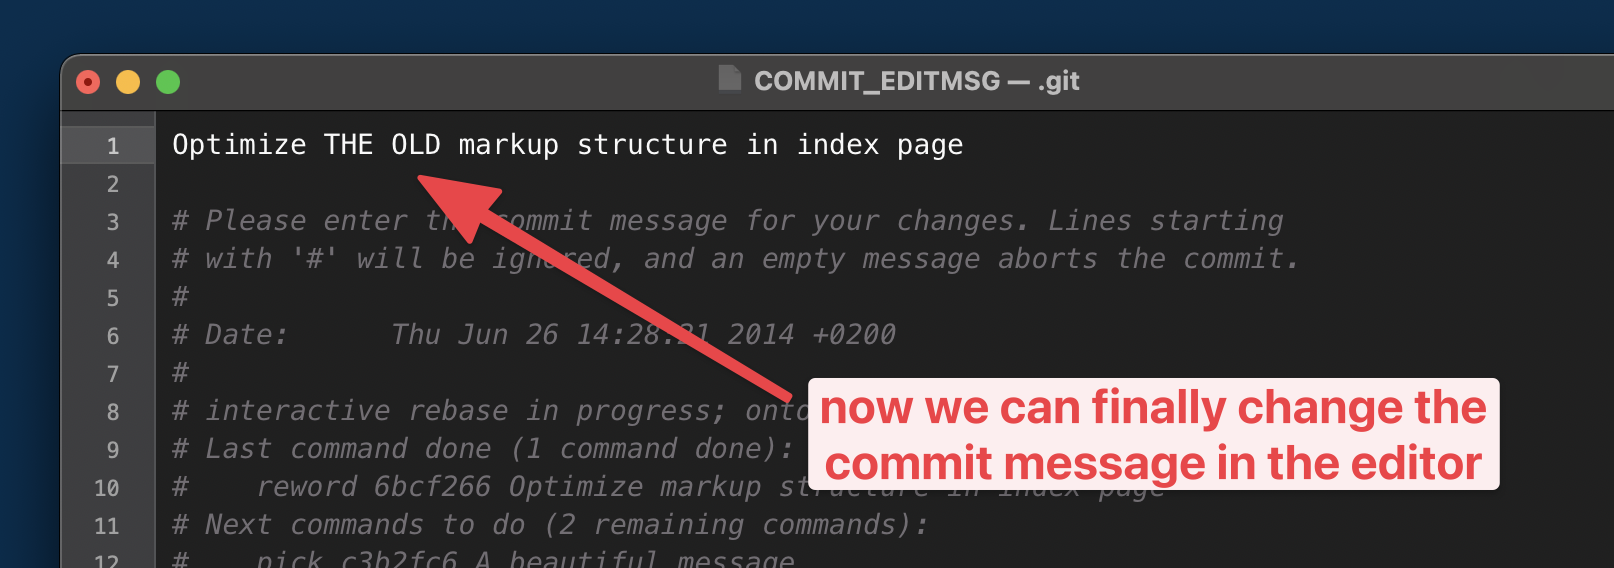 Editing the commit message in an editor window